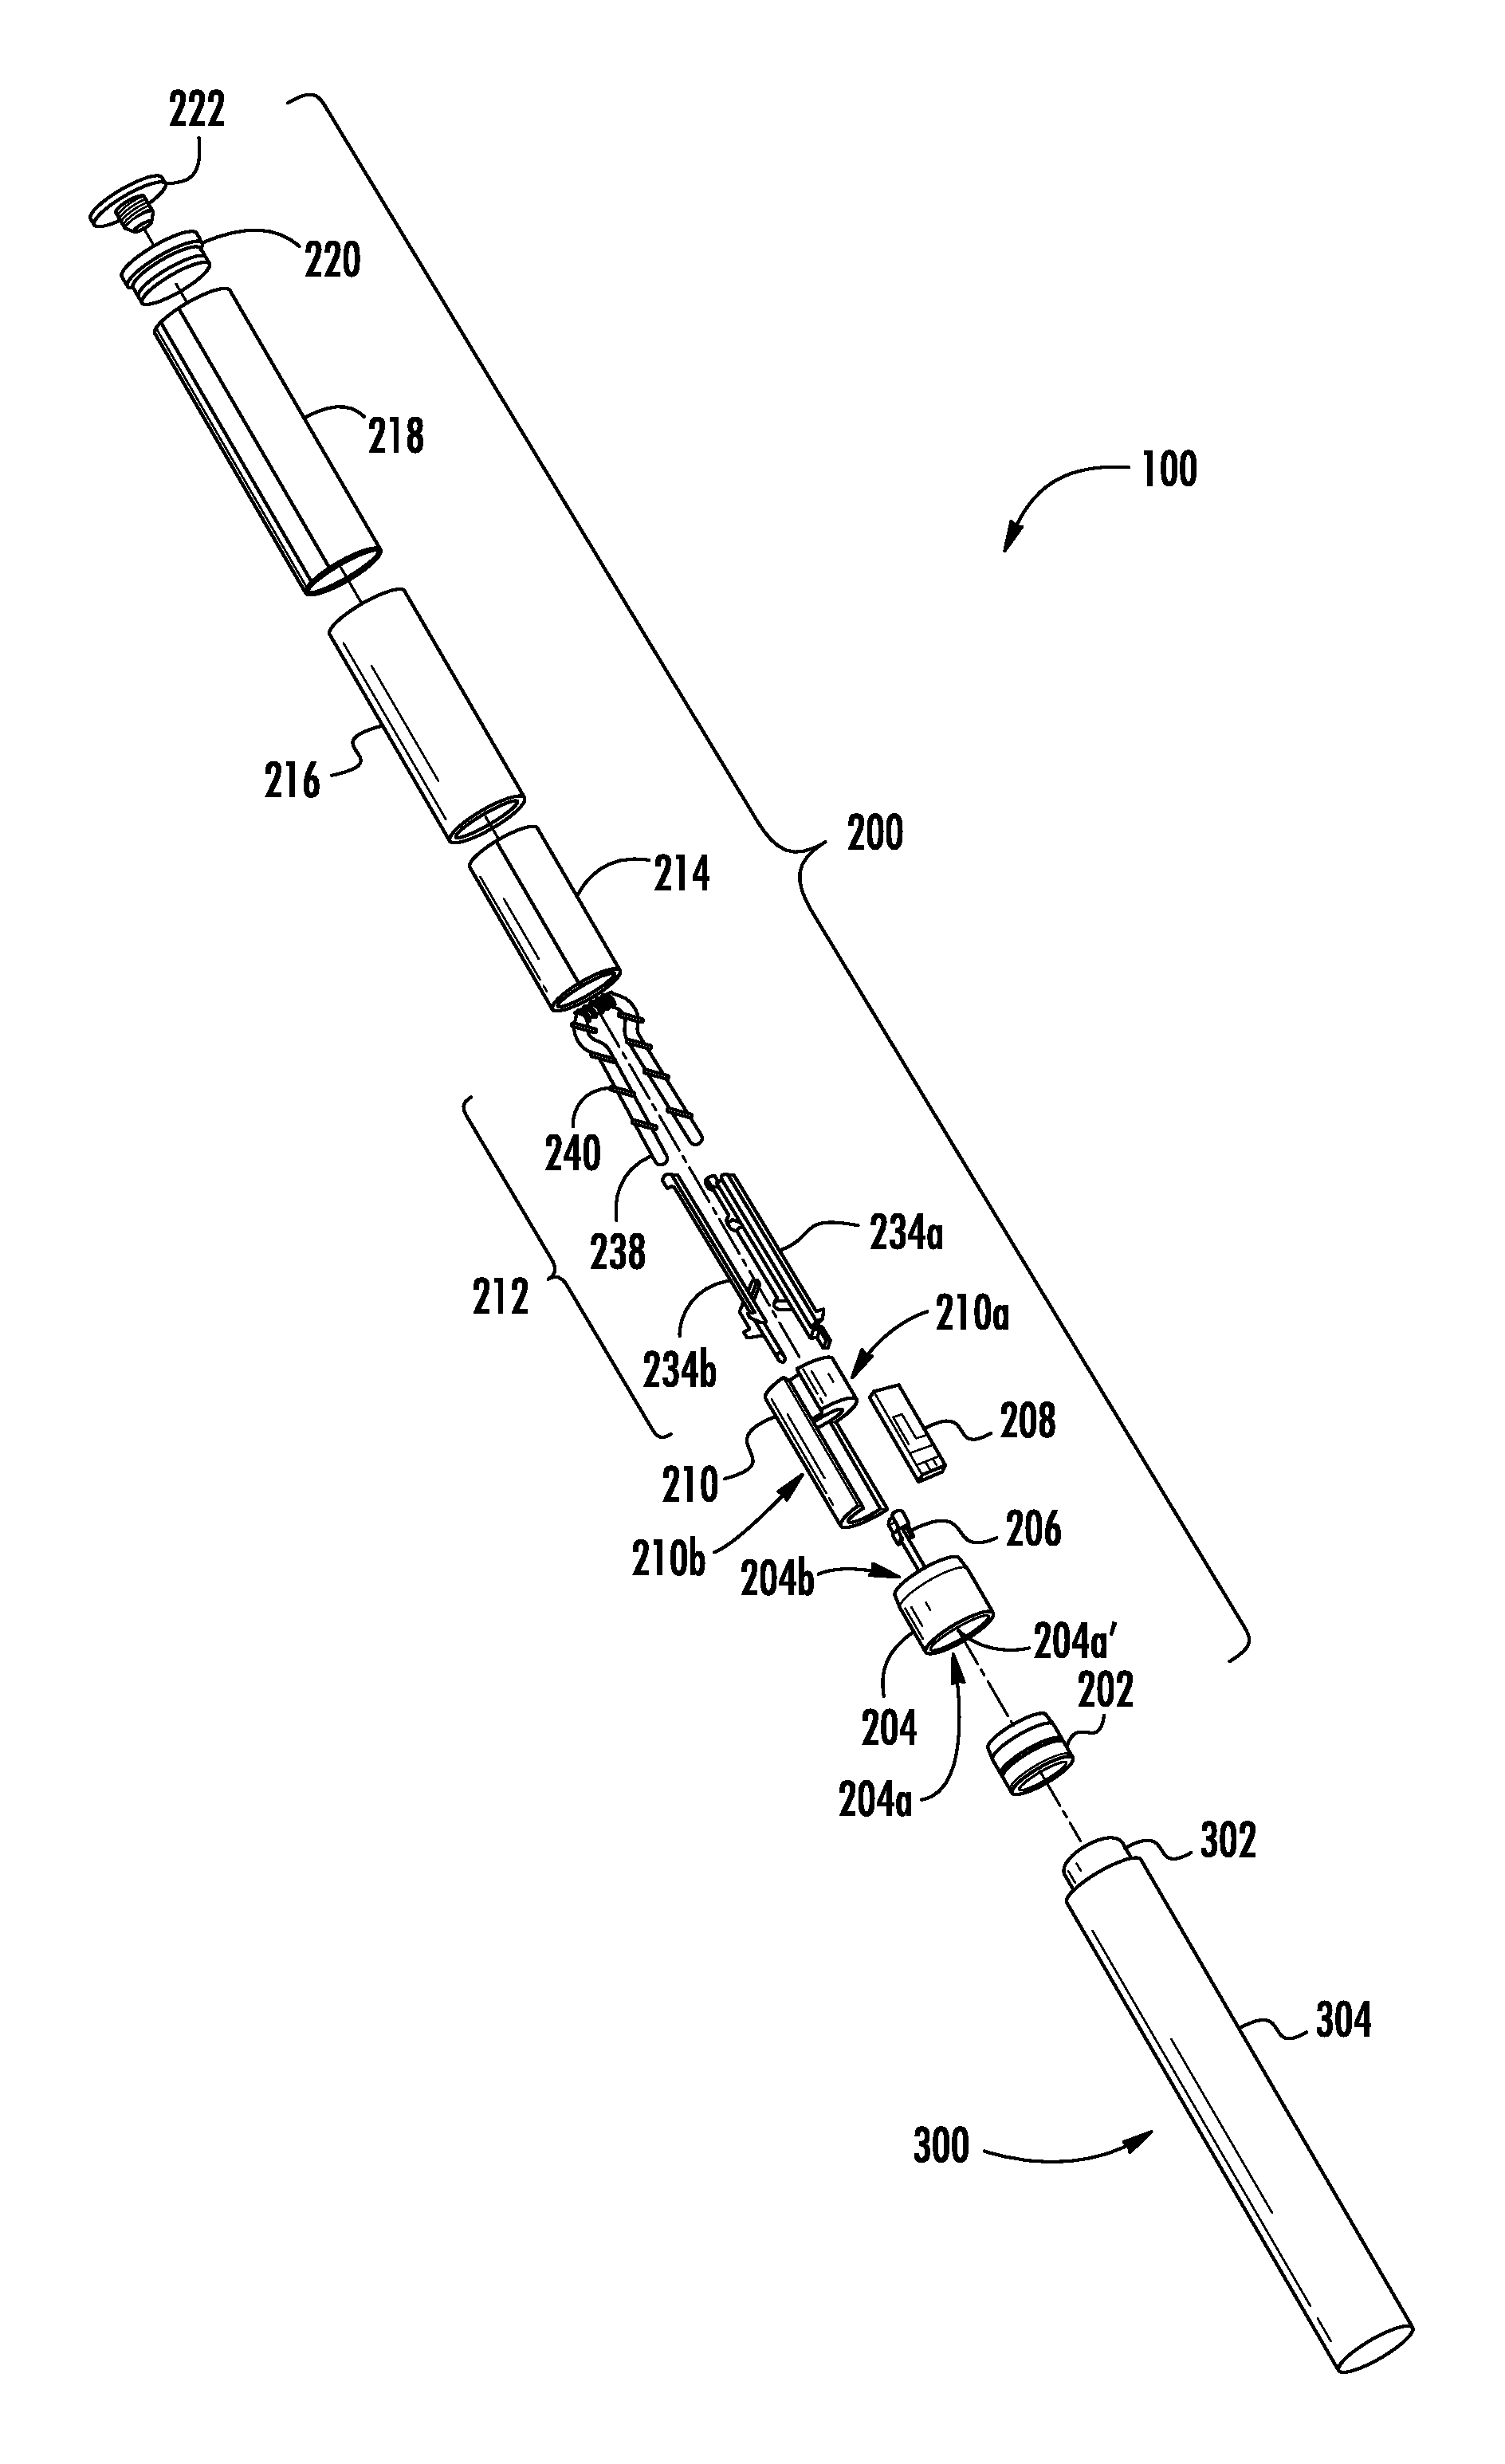 Method for Assembling a Cartridge for a Smoking Article